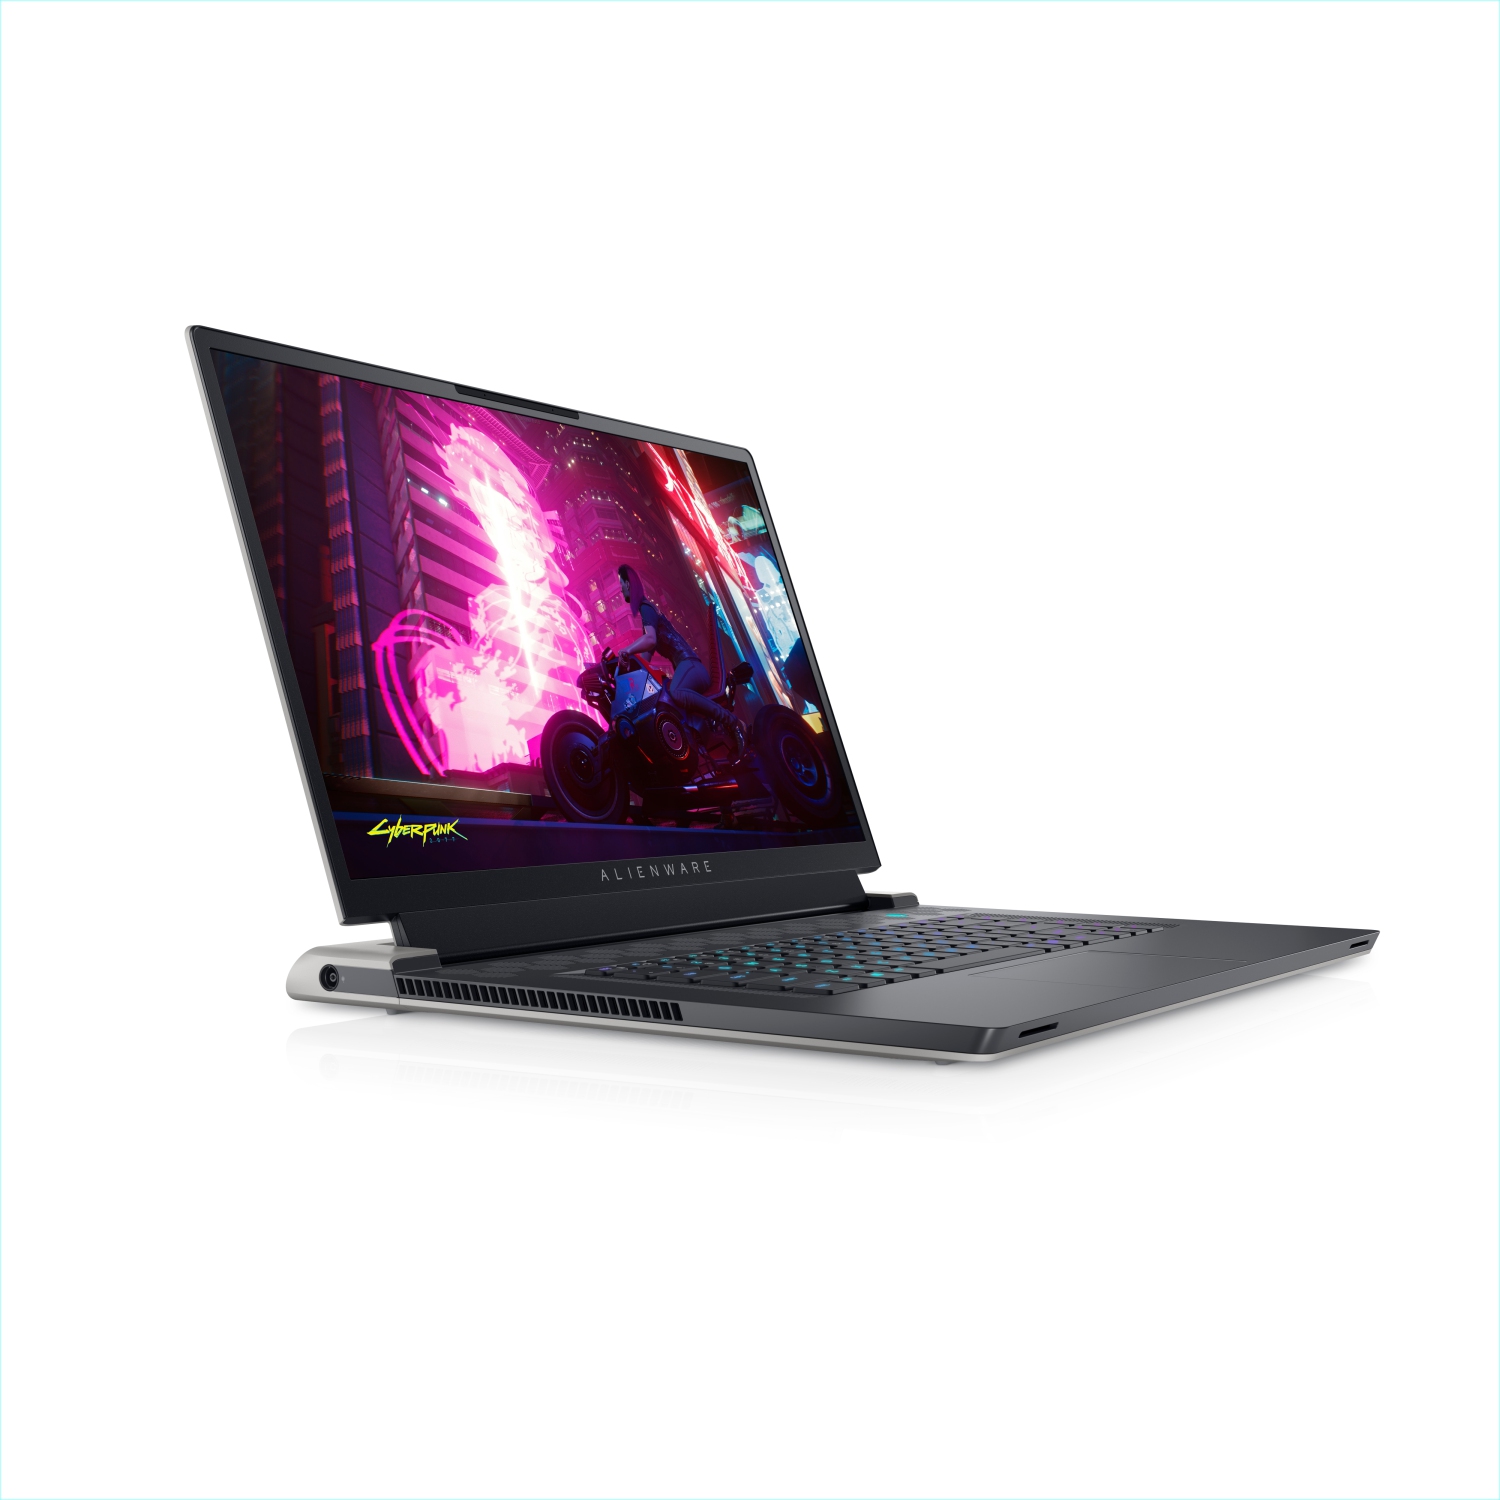 Refurbished (Excellent) – Dell Alienware X17 R1 Gaming Laptop (2021) | 17.3" FHD+ | Core i7 - 512GB SSD - 16GB RAM - RTX 3070 | Cores - 8GB GDDR6